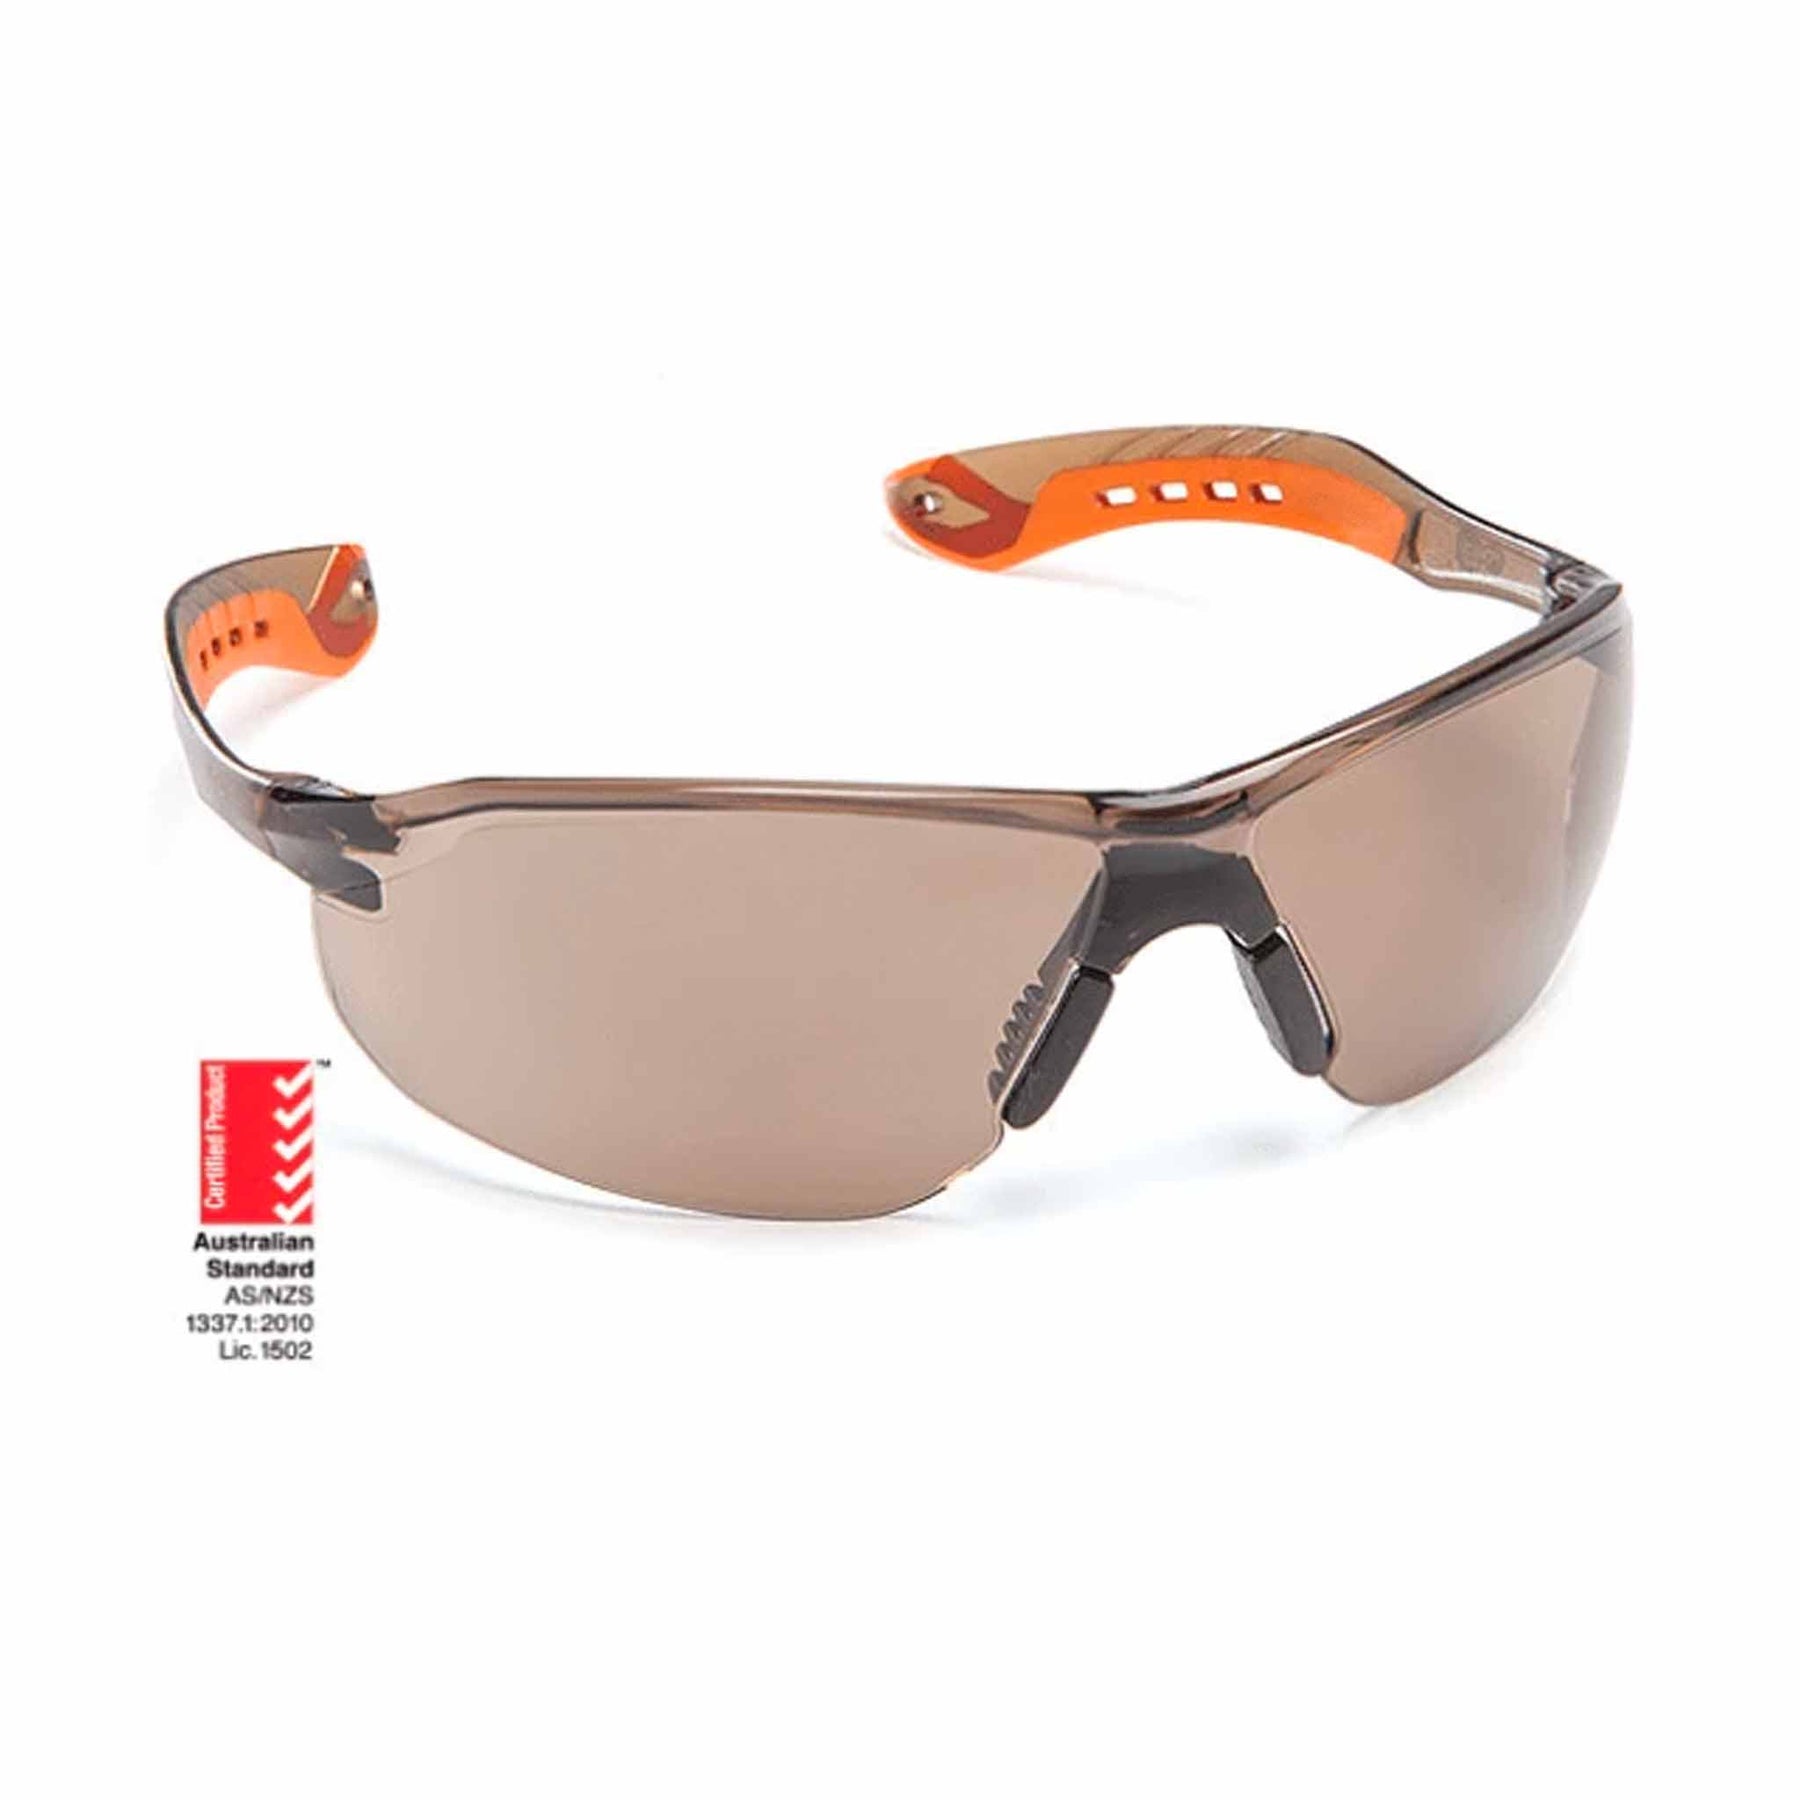 force360 glide glasses with dark brown lens